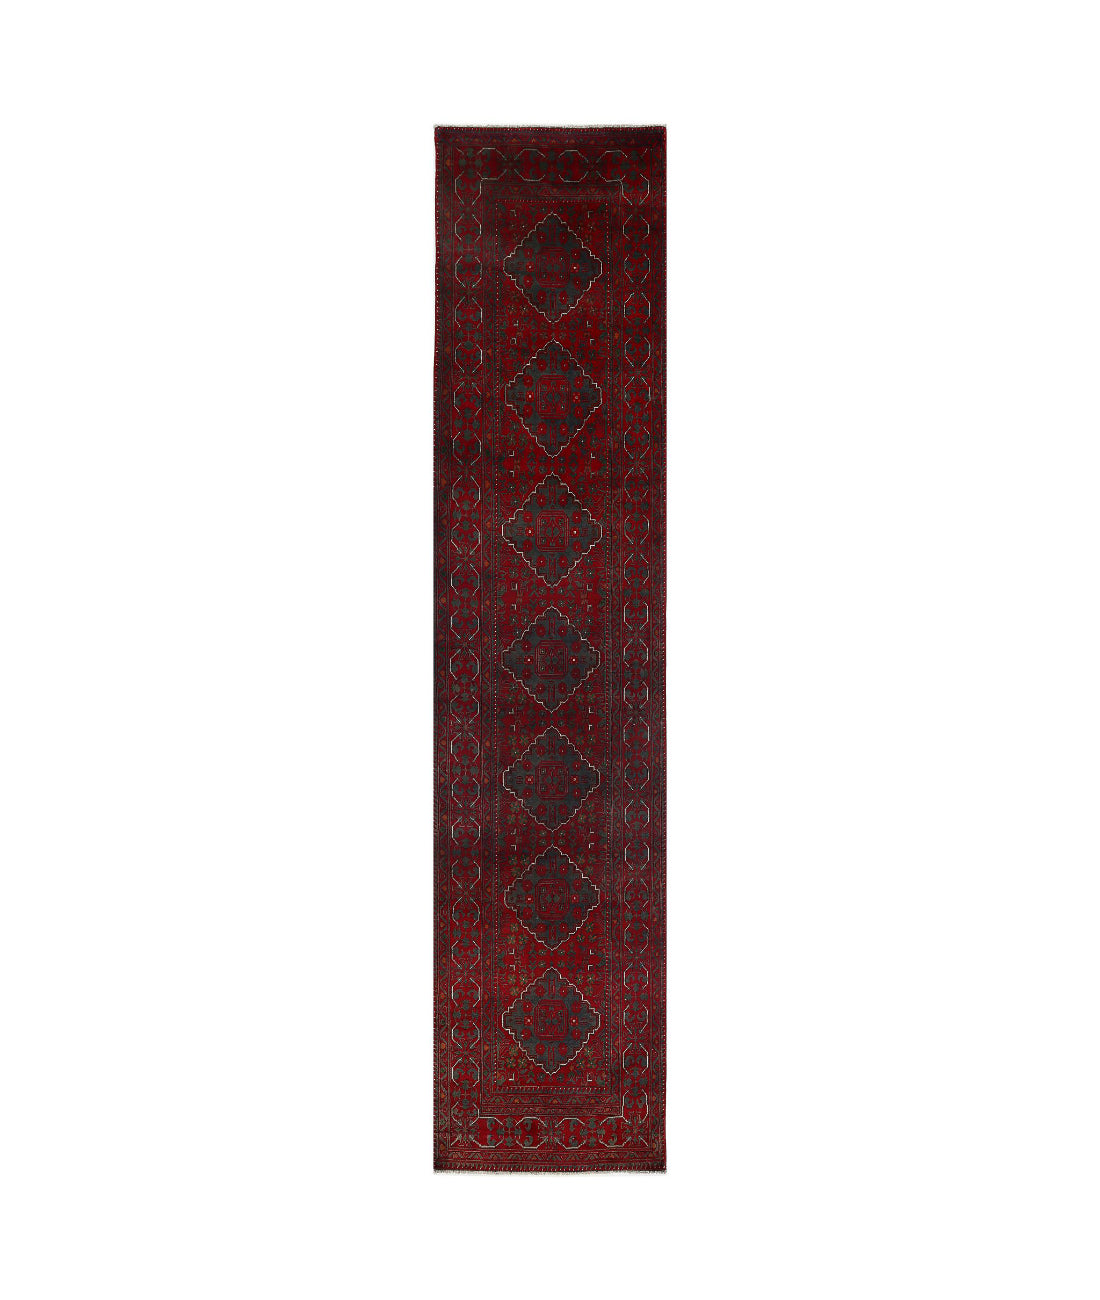 Afghan 2'8'' X 12'5'' Hand-Knotted Wool Rug 2'8'' x 12'5'' (80 X 373) / Red / N/A